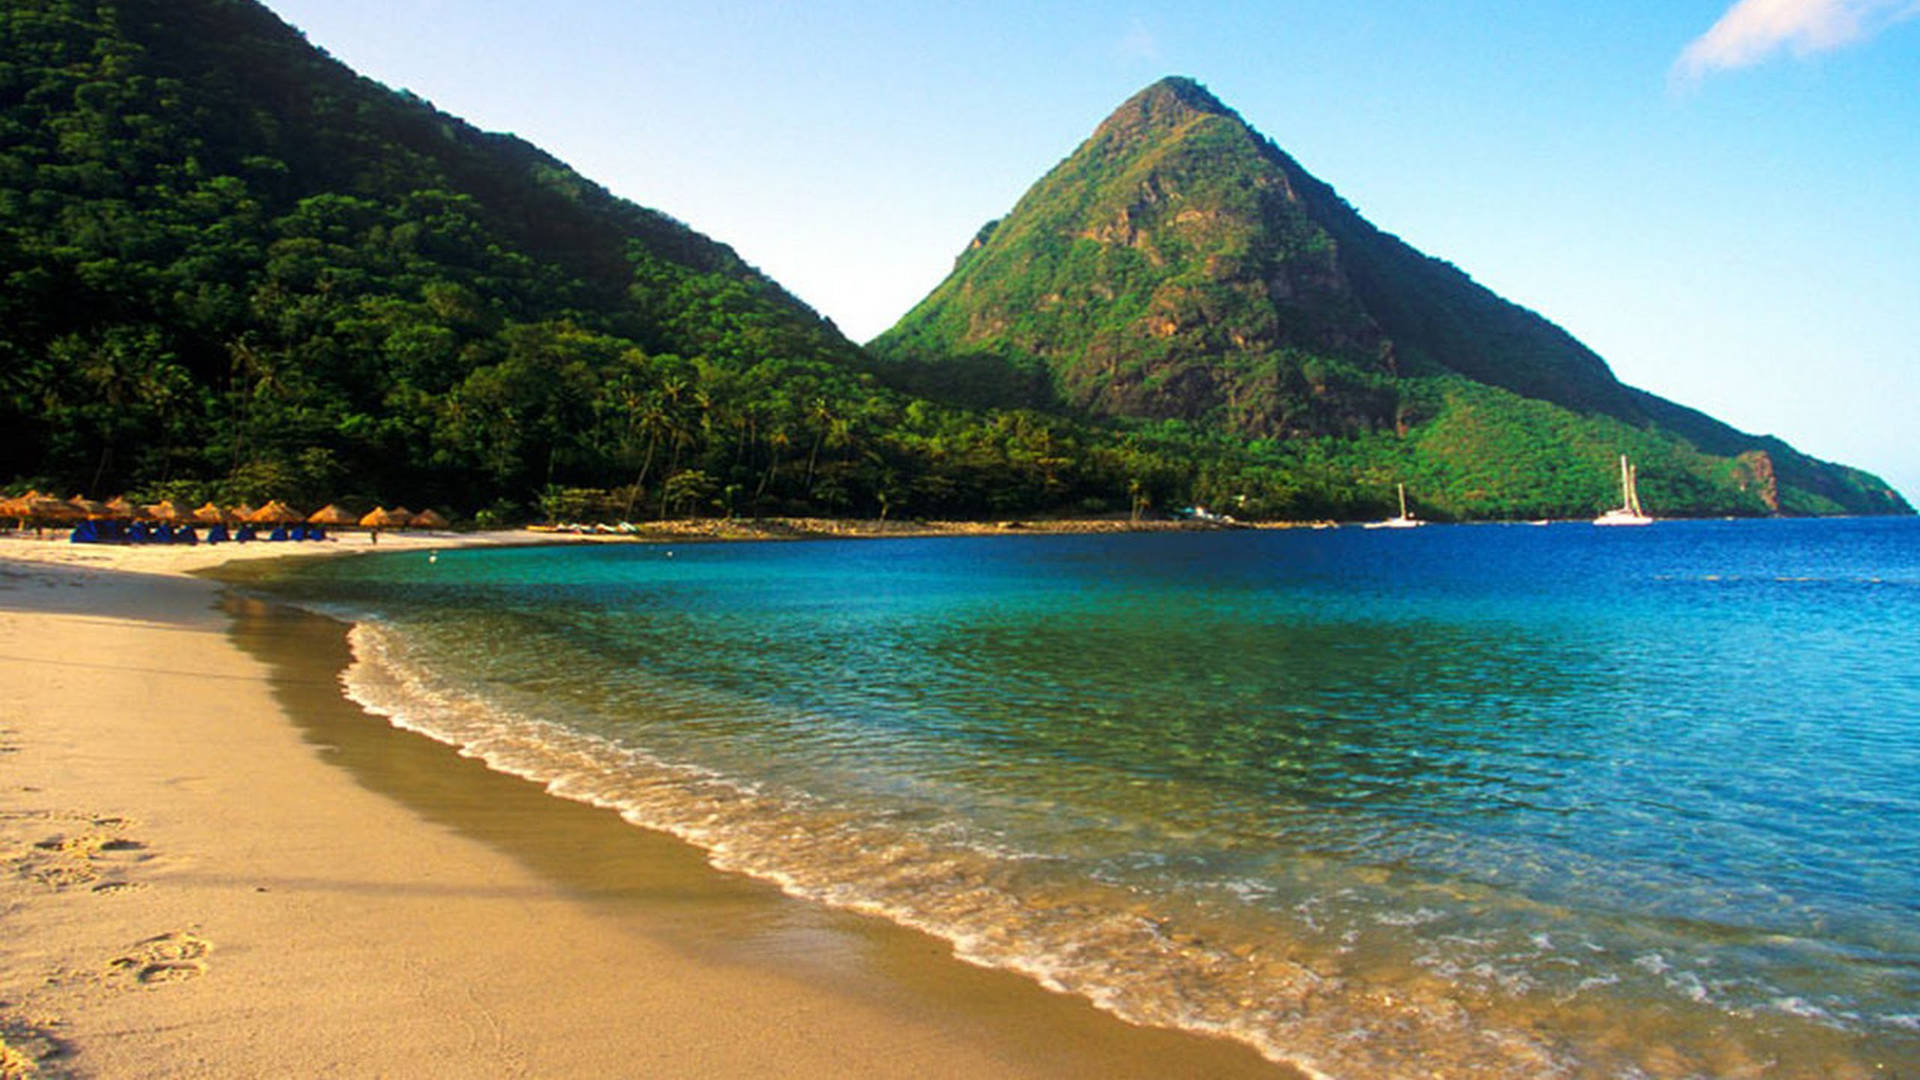 The Luxurious Royalton St. Lucia Resort amidst Tropical Beauty Wallpaper